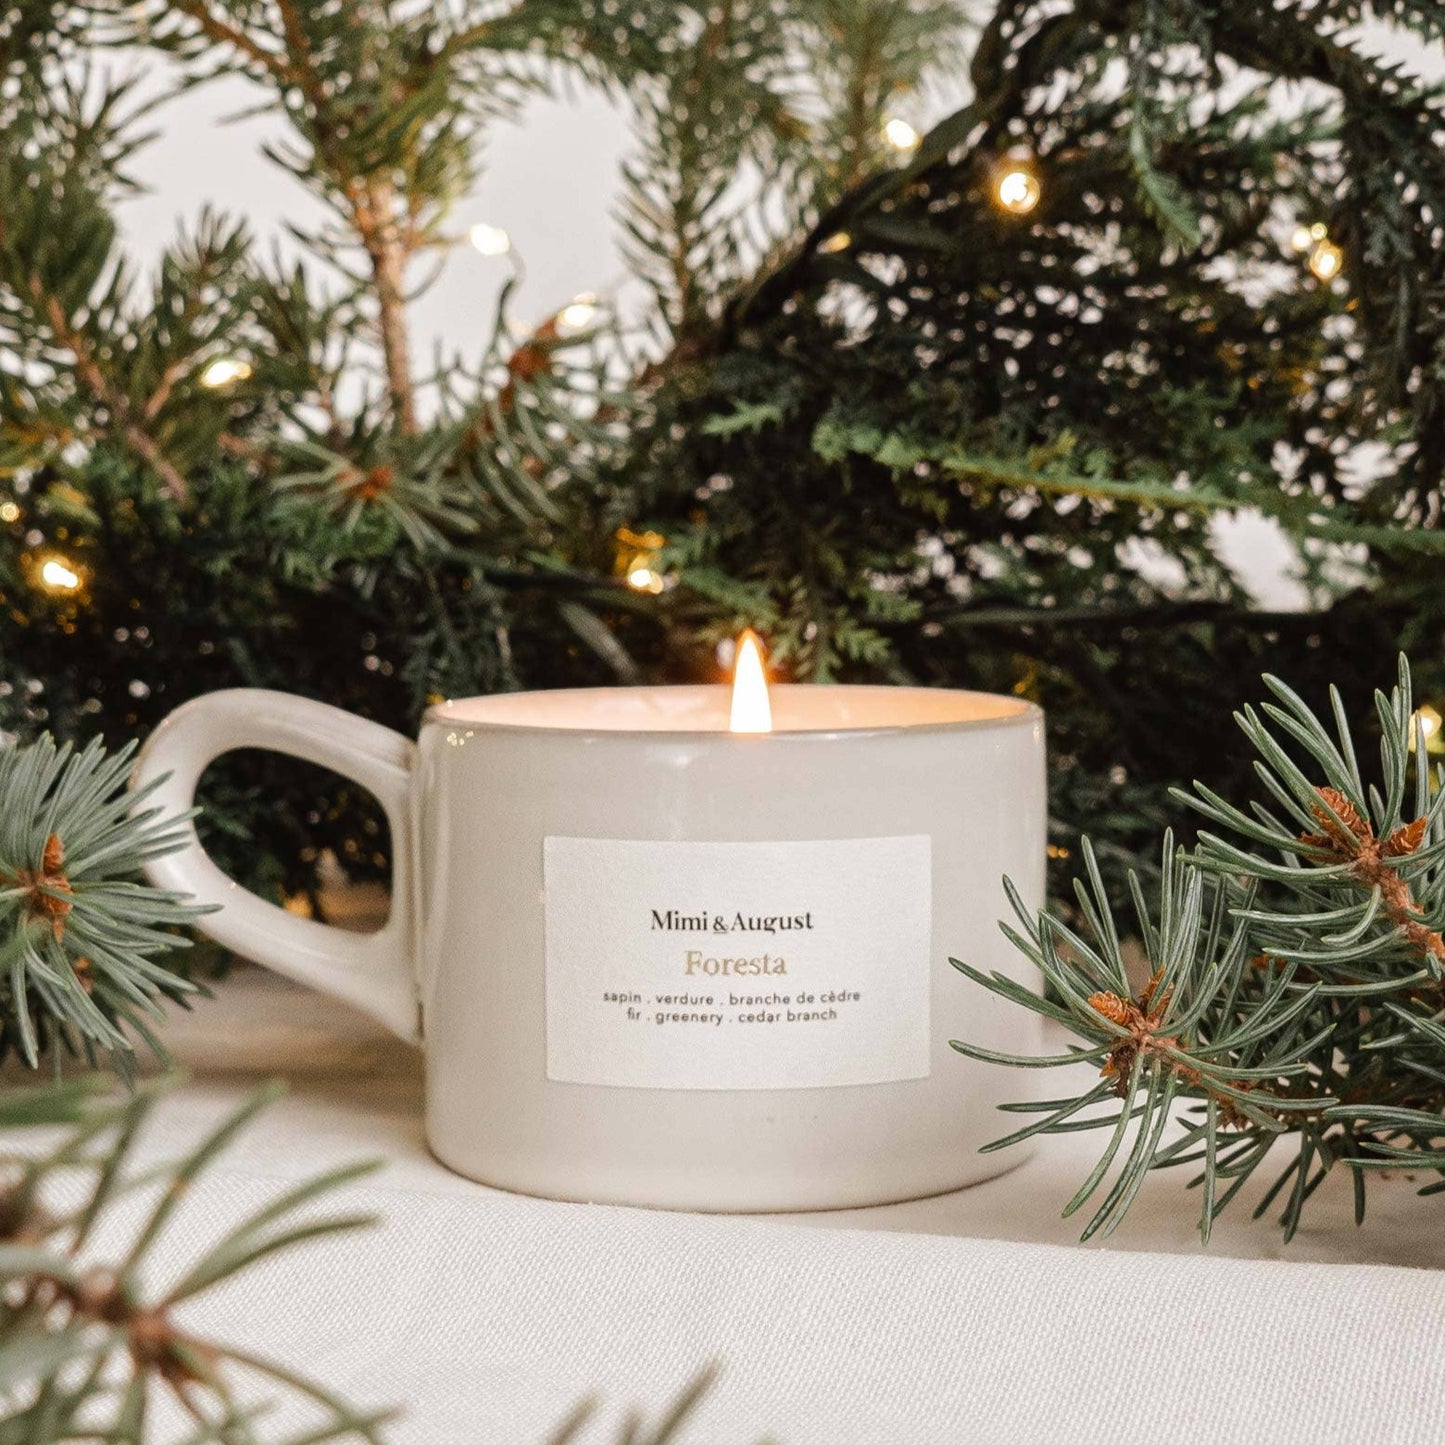 Foresta Soy Wax Reusable Candle